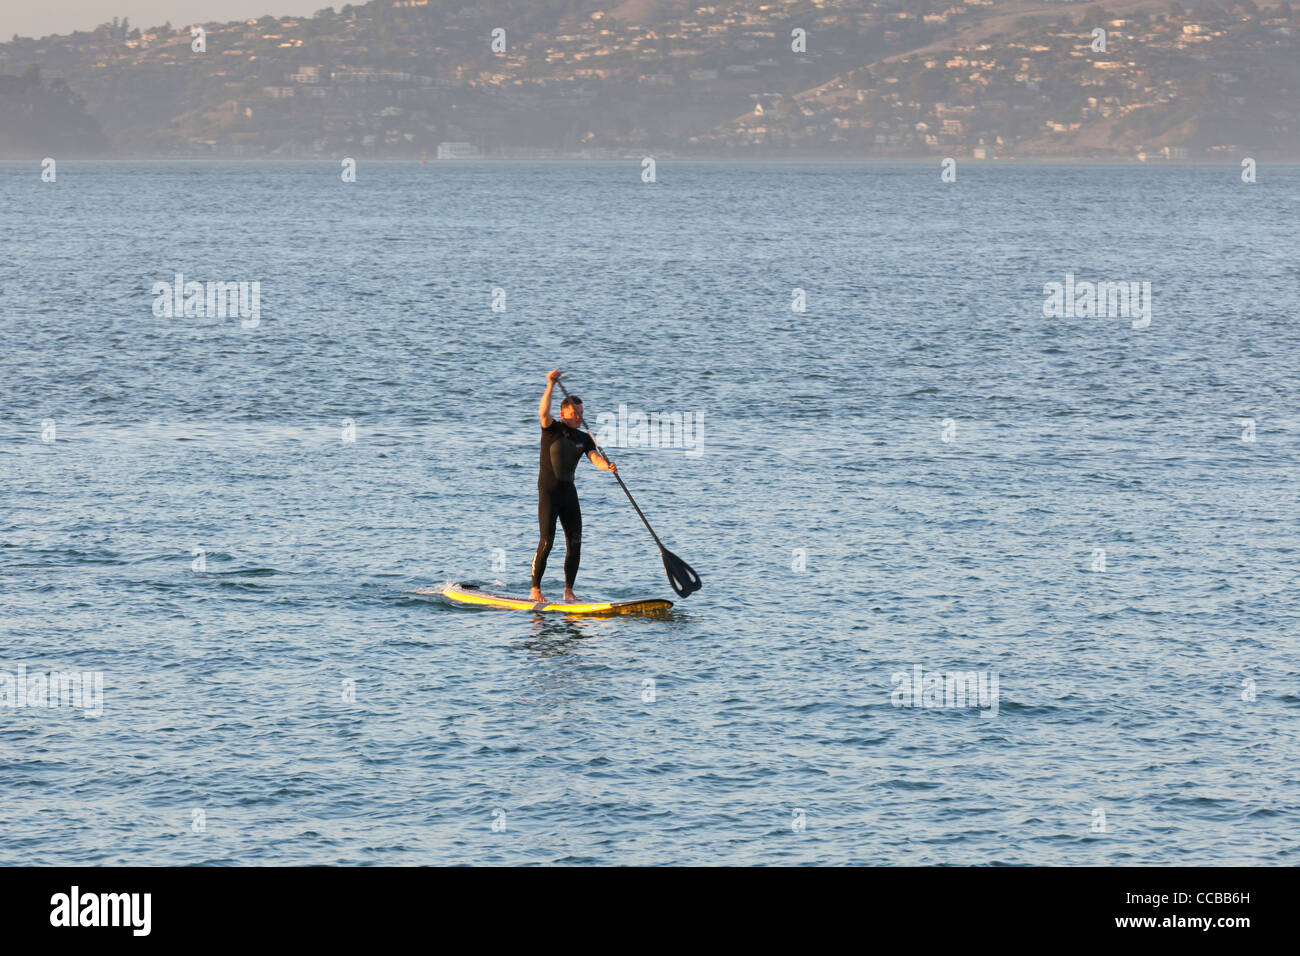 A man paddle boarding on water Stock Photo